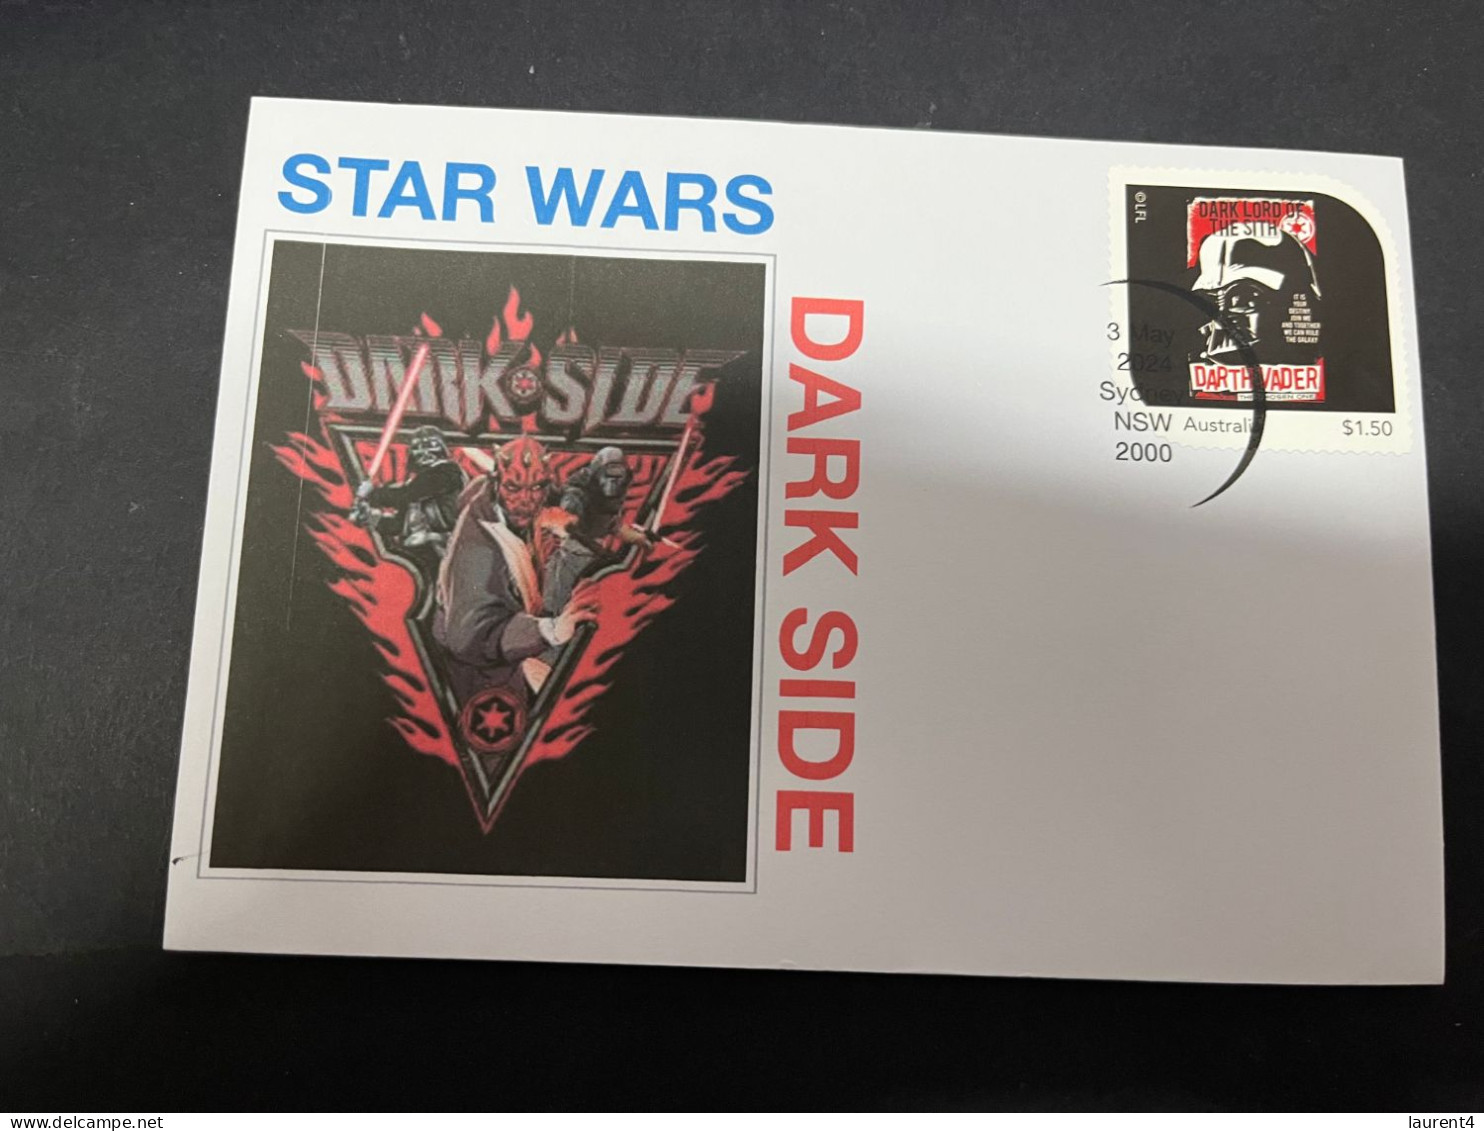 10-5-2024 (4 Z 37) Australia Post - Star Wars Dark Side - 2 Covers (1 With New Stamp Released 3rd May 2024) - Usados